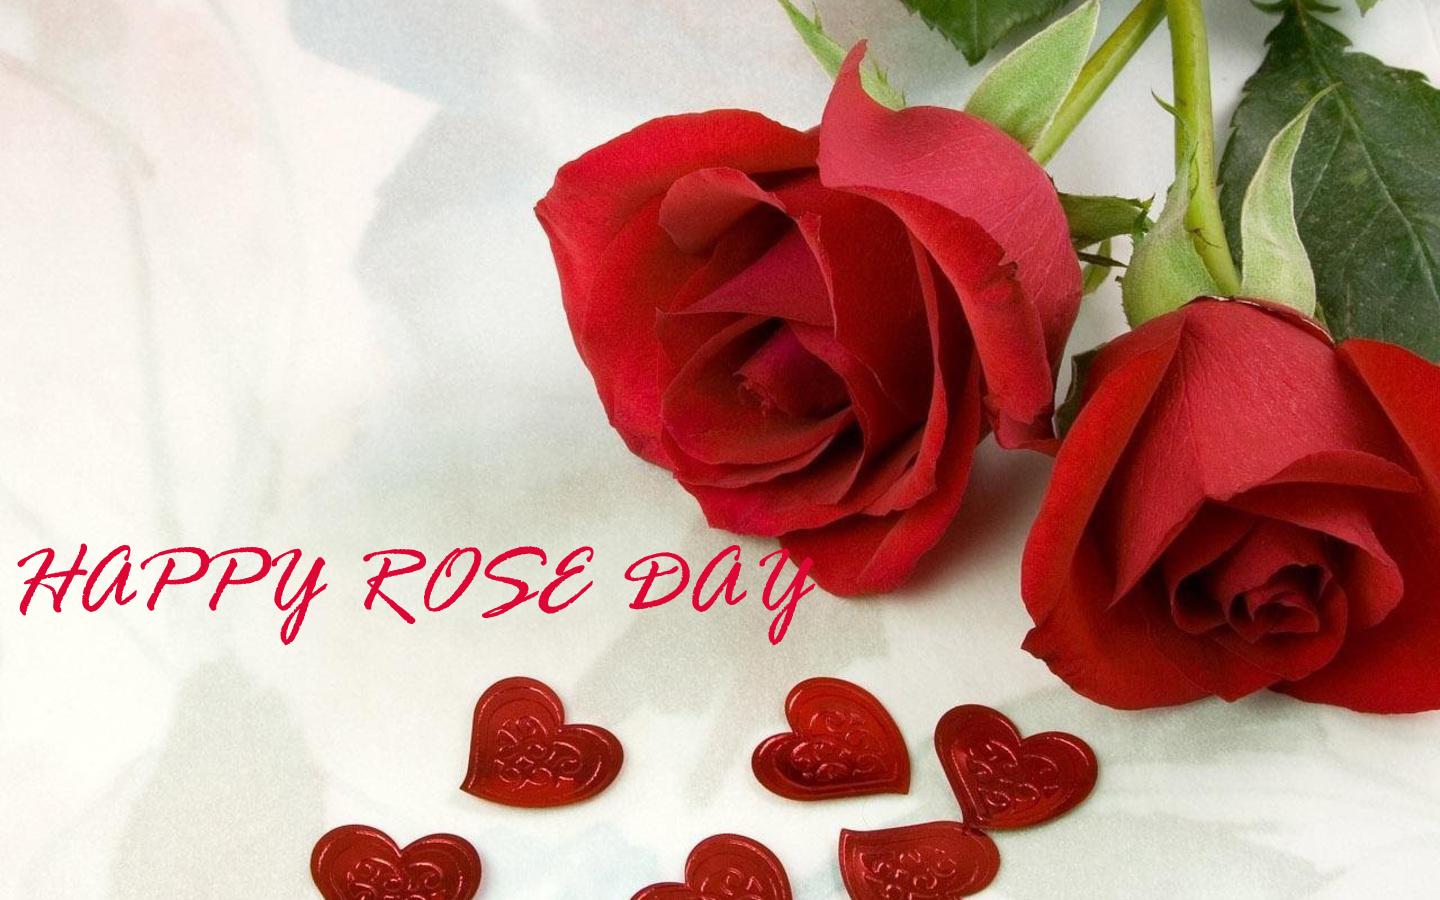 Happy Rose Day 2022: WhatsApp wishes, quotes, SMS to send to your loved ones